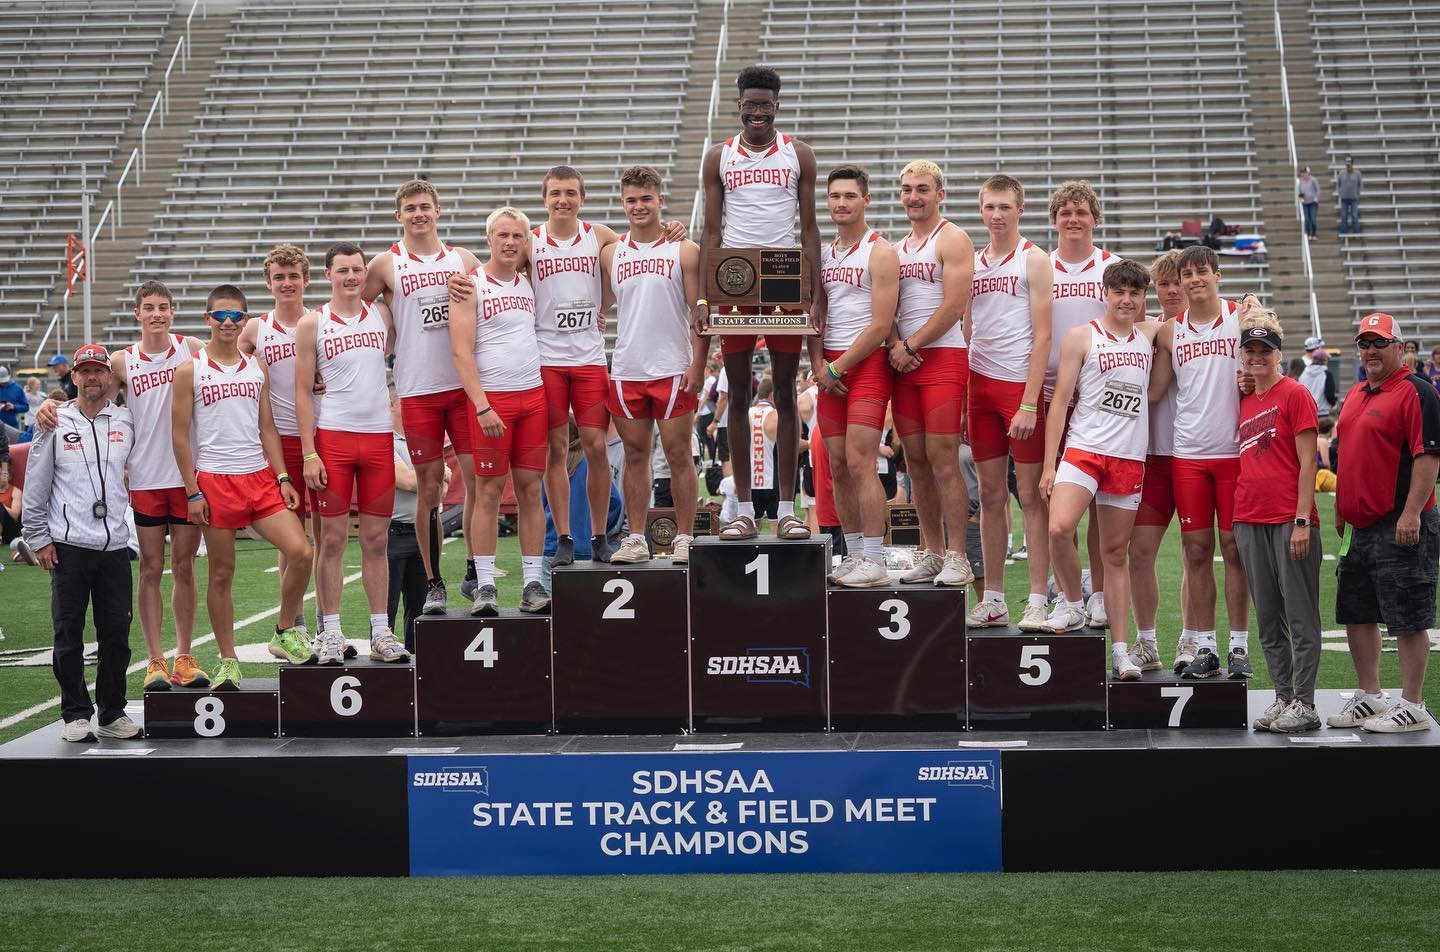 Noah and his team have clinched the South Dakota Class B State Track &amp; Field Championship for the second consecutive year! So proud of these boys! #GregoryGorillas &hearts;️🖤